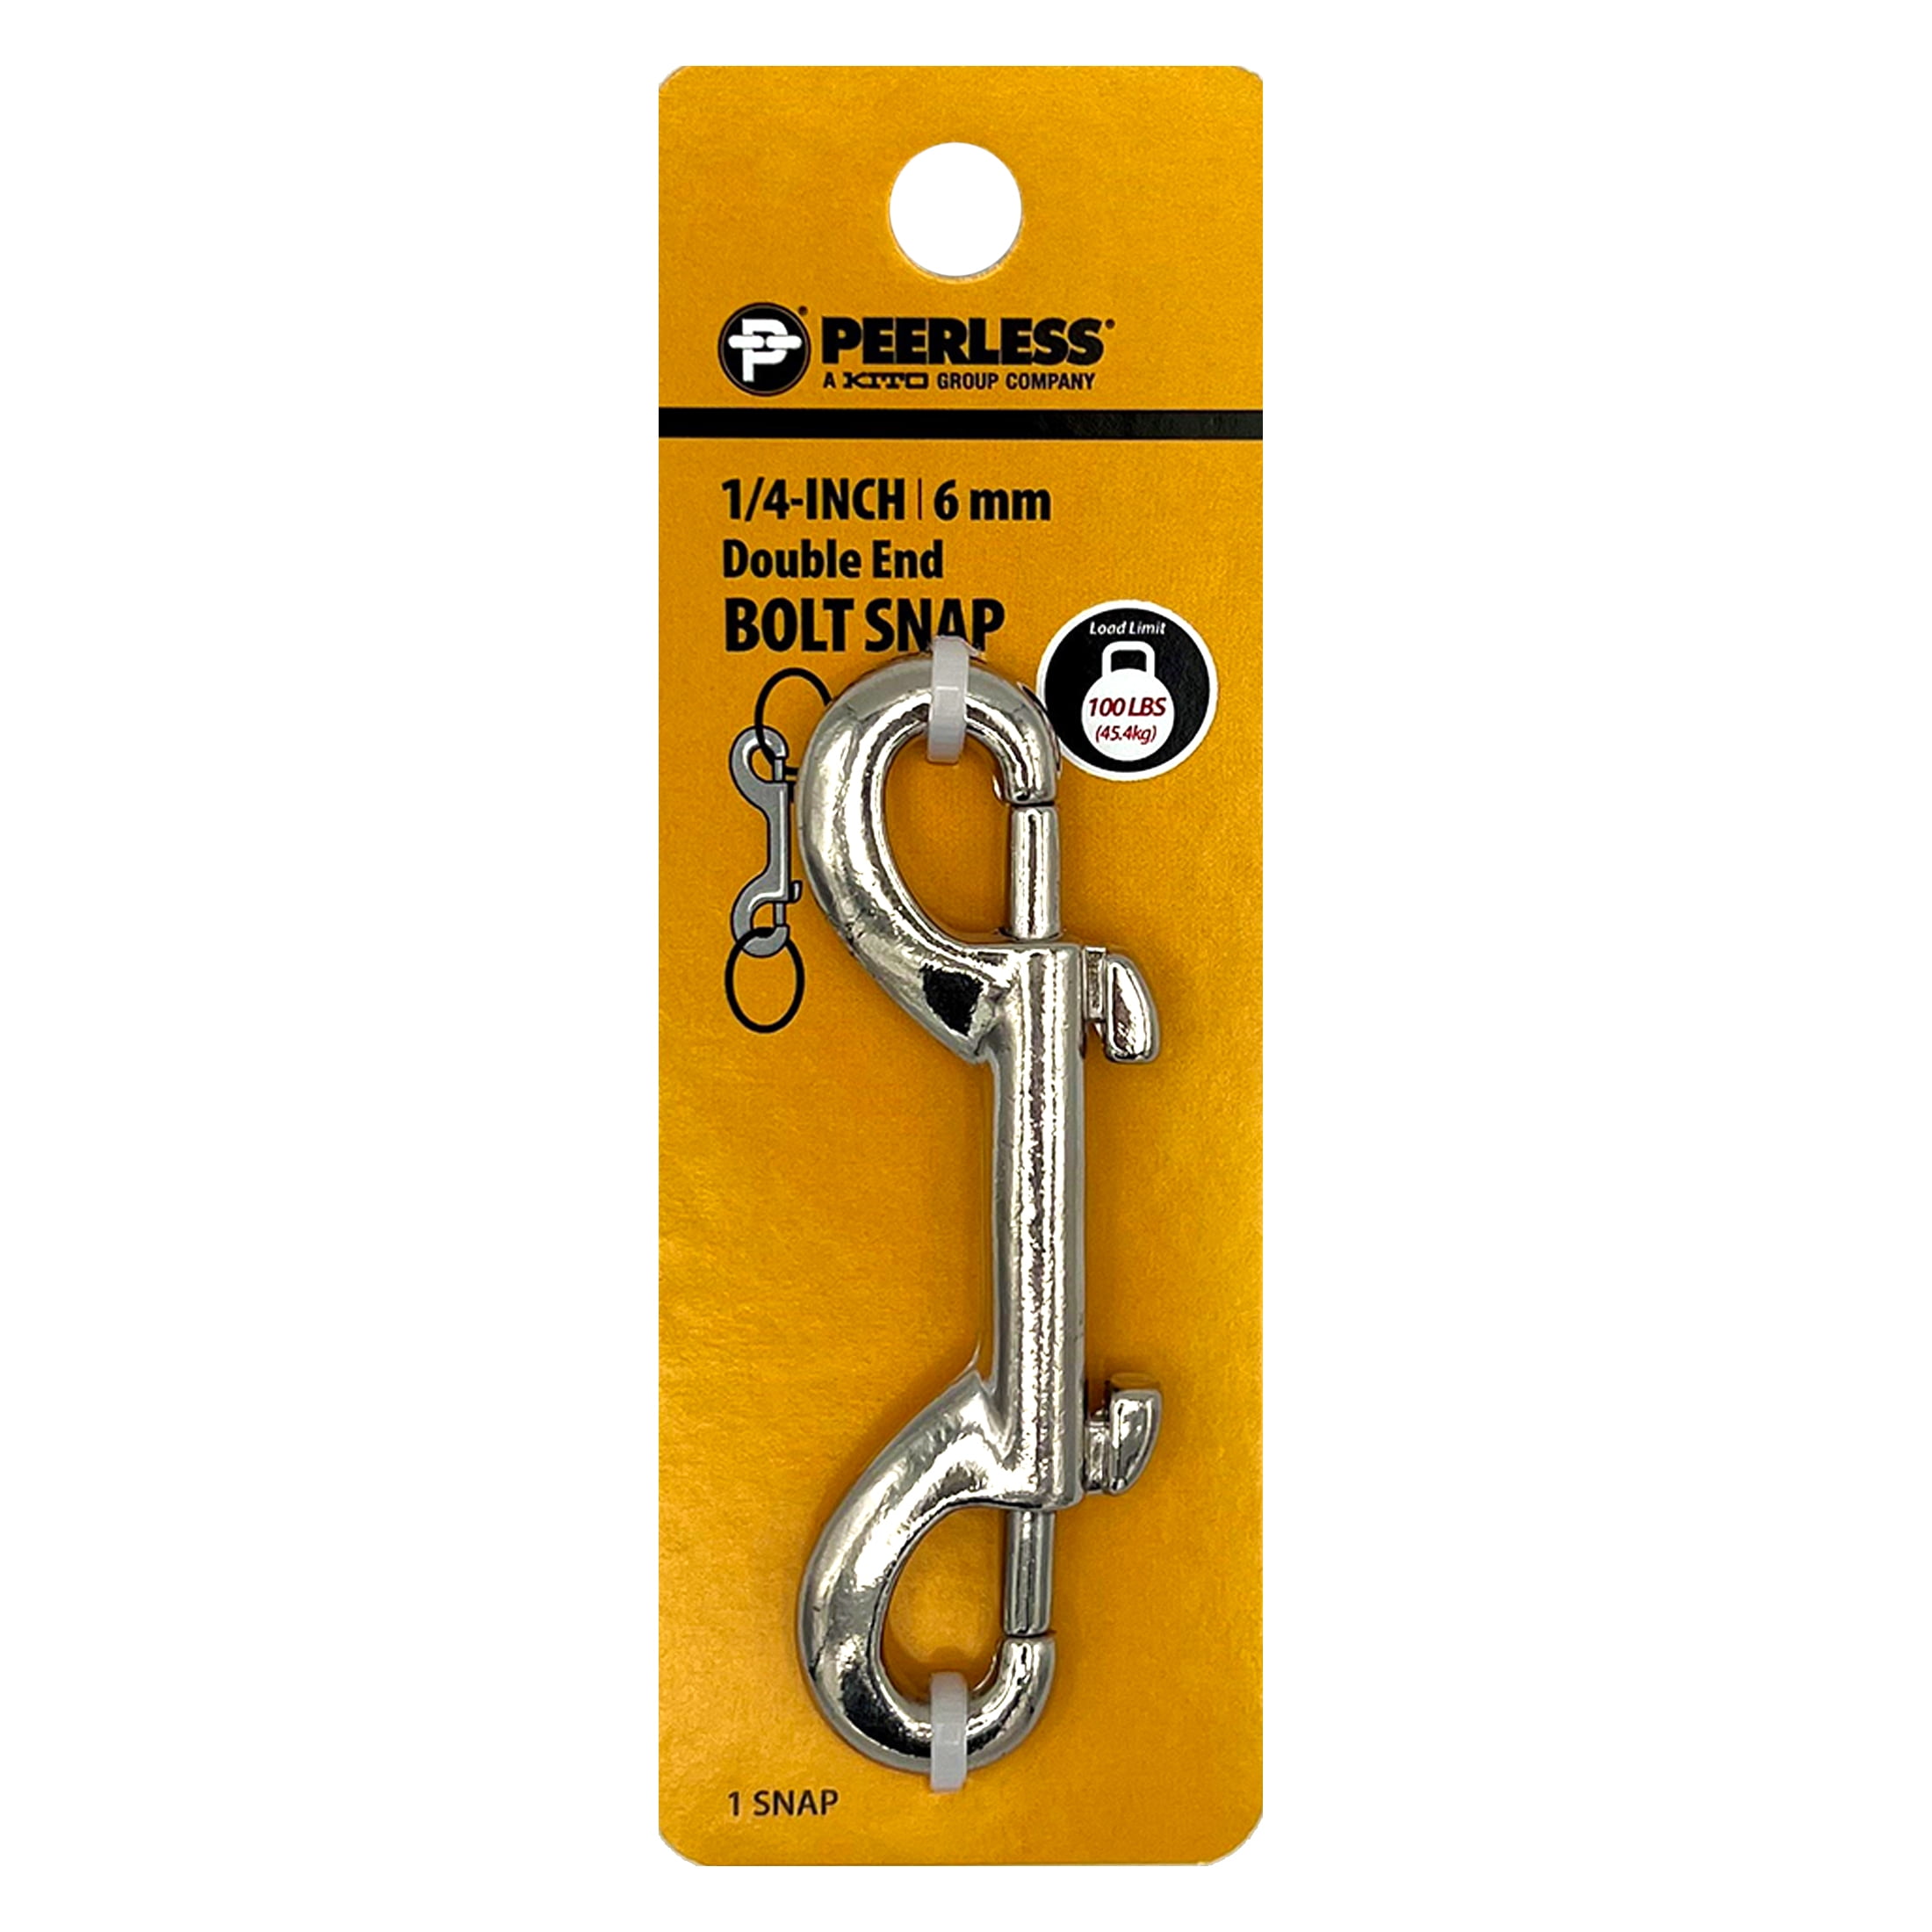 Peerless Double End Bolt Snap, Silver